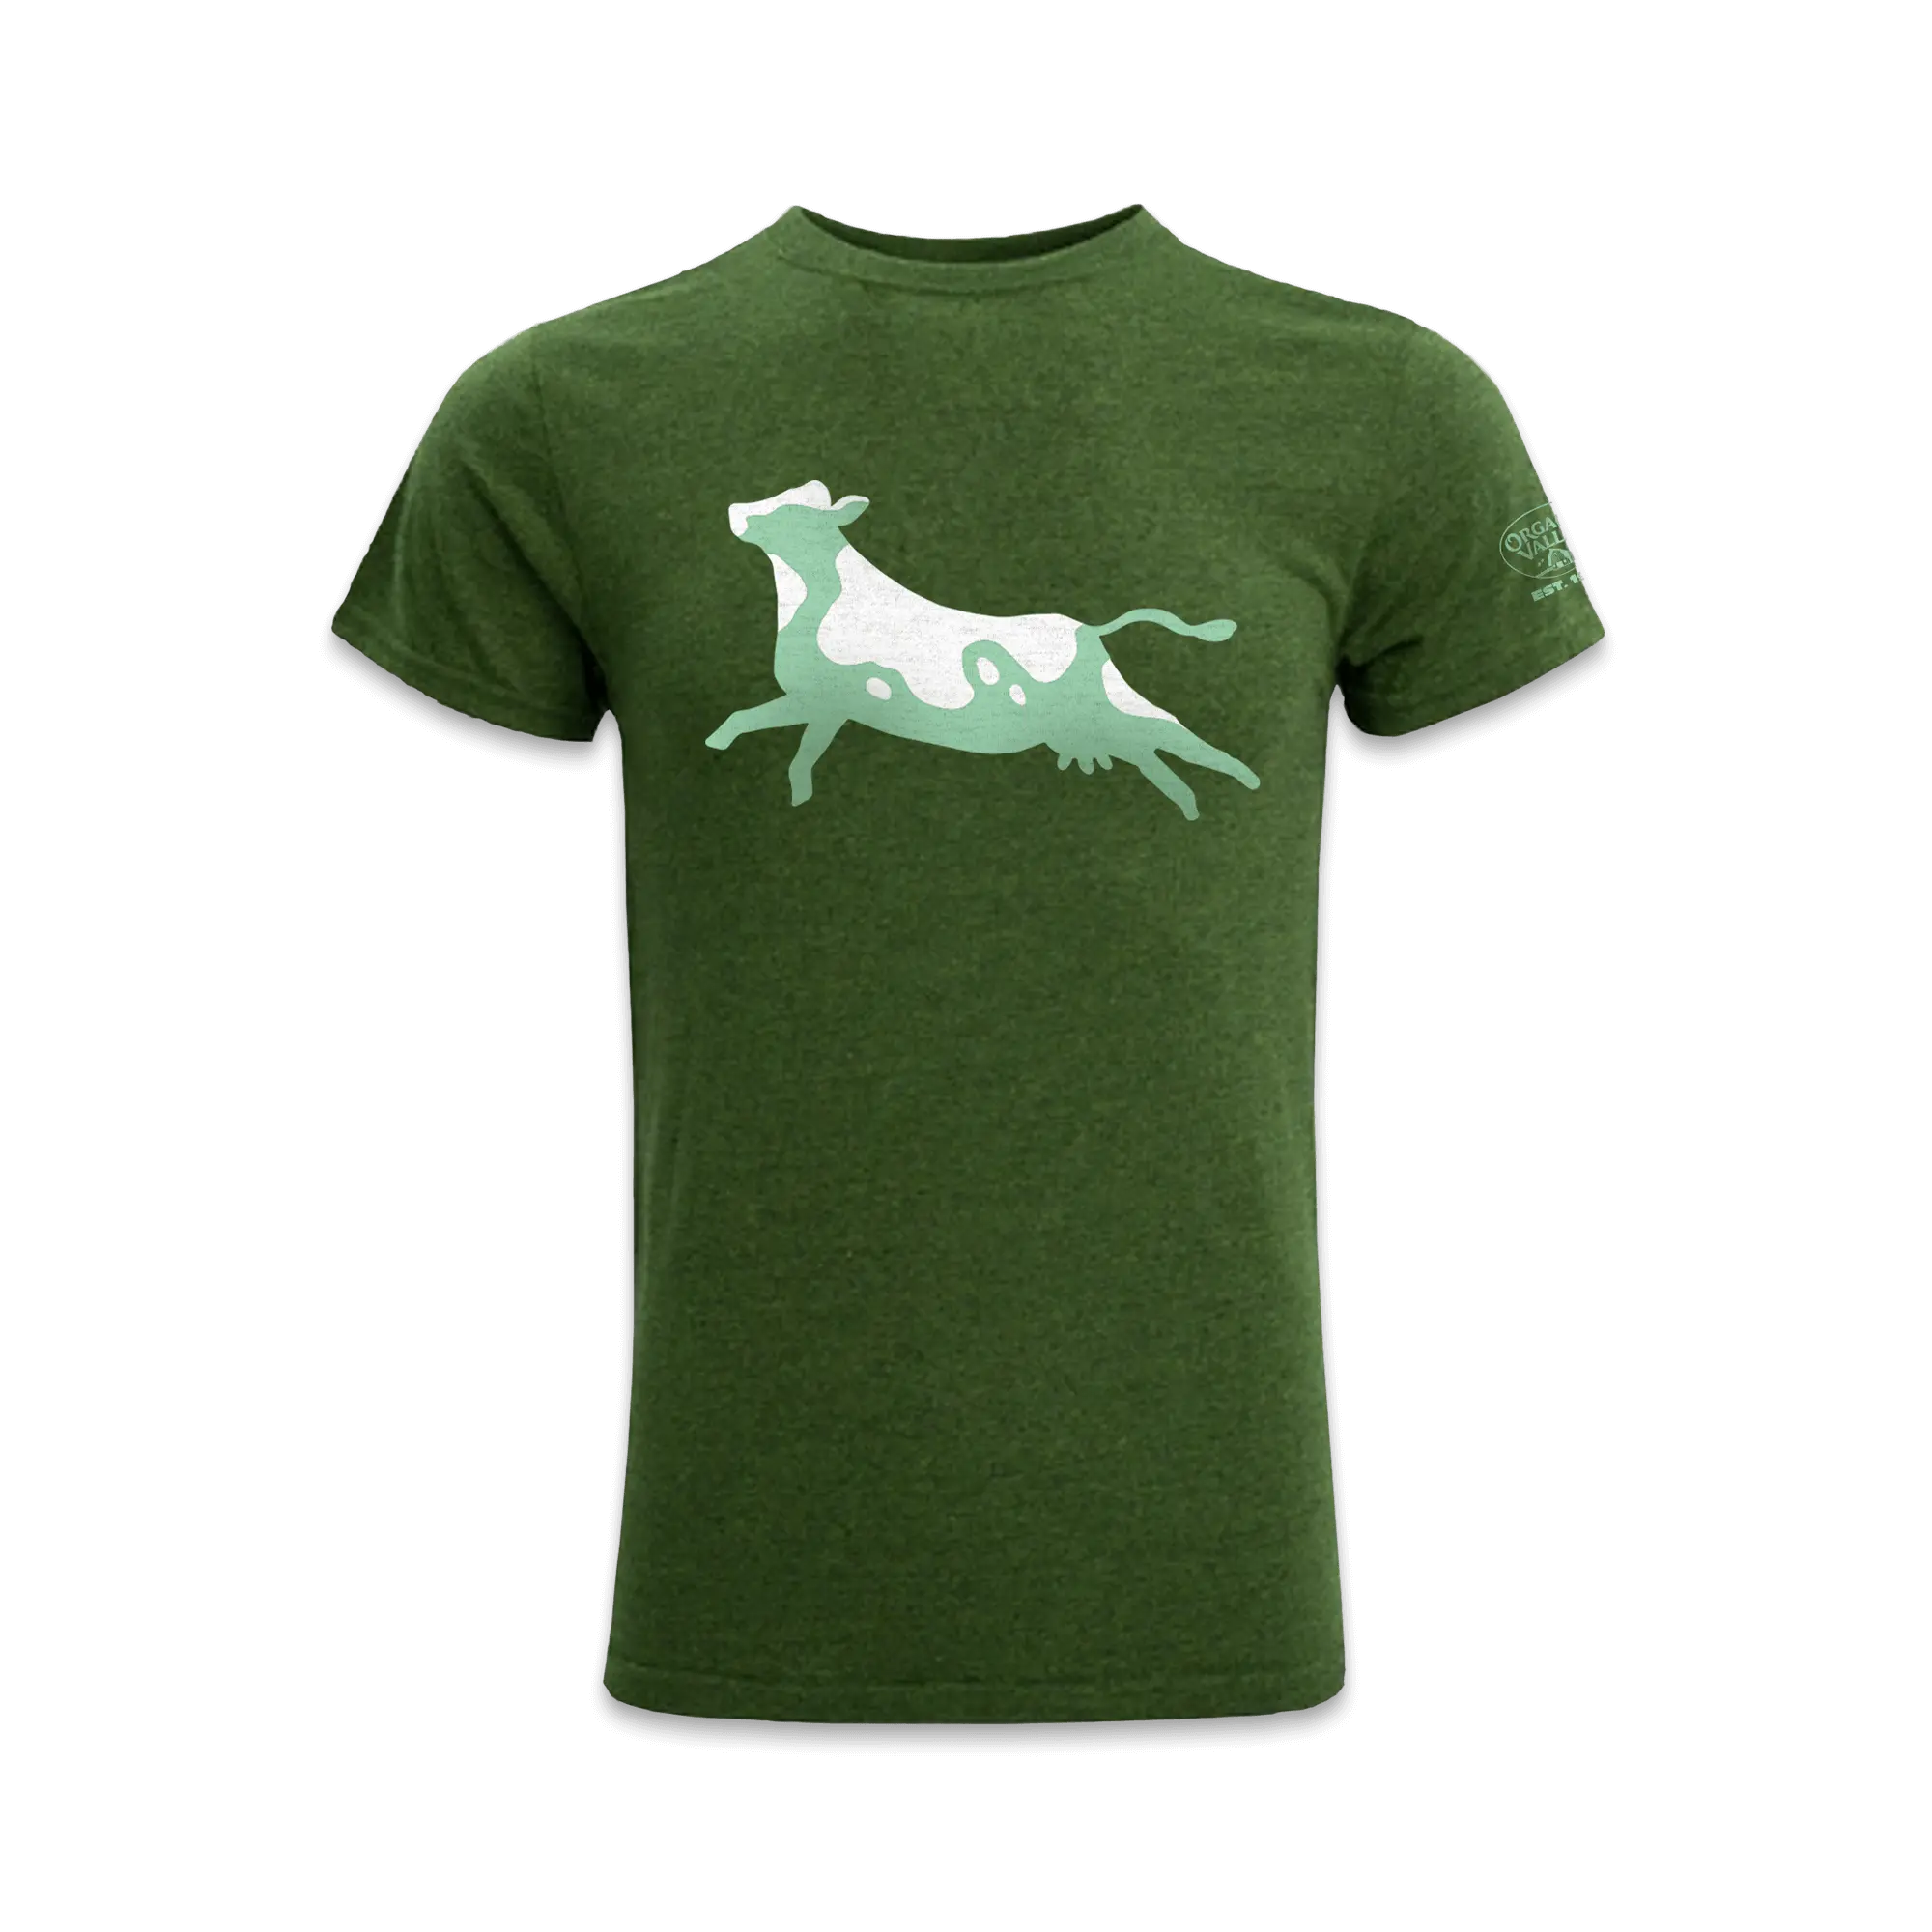 Leaping Cow Tee in Grass color